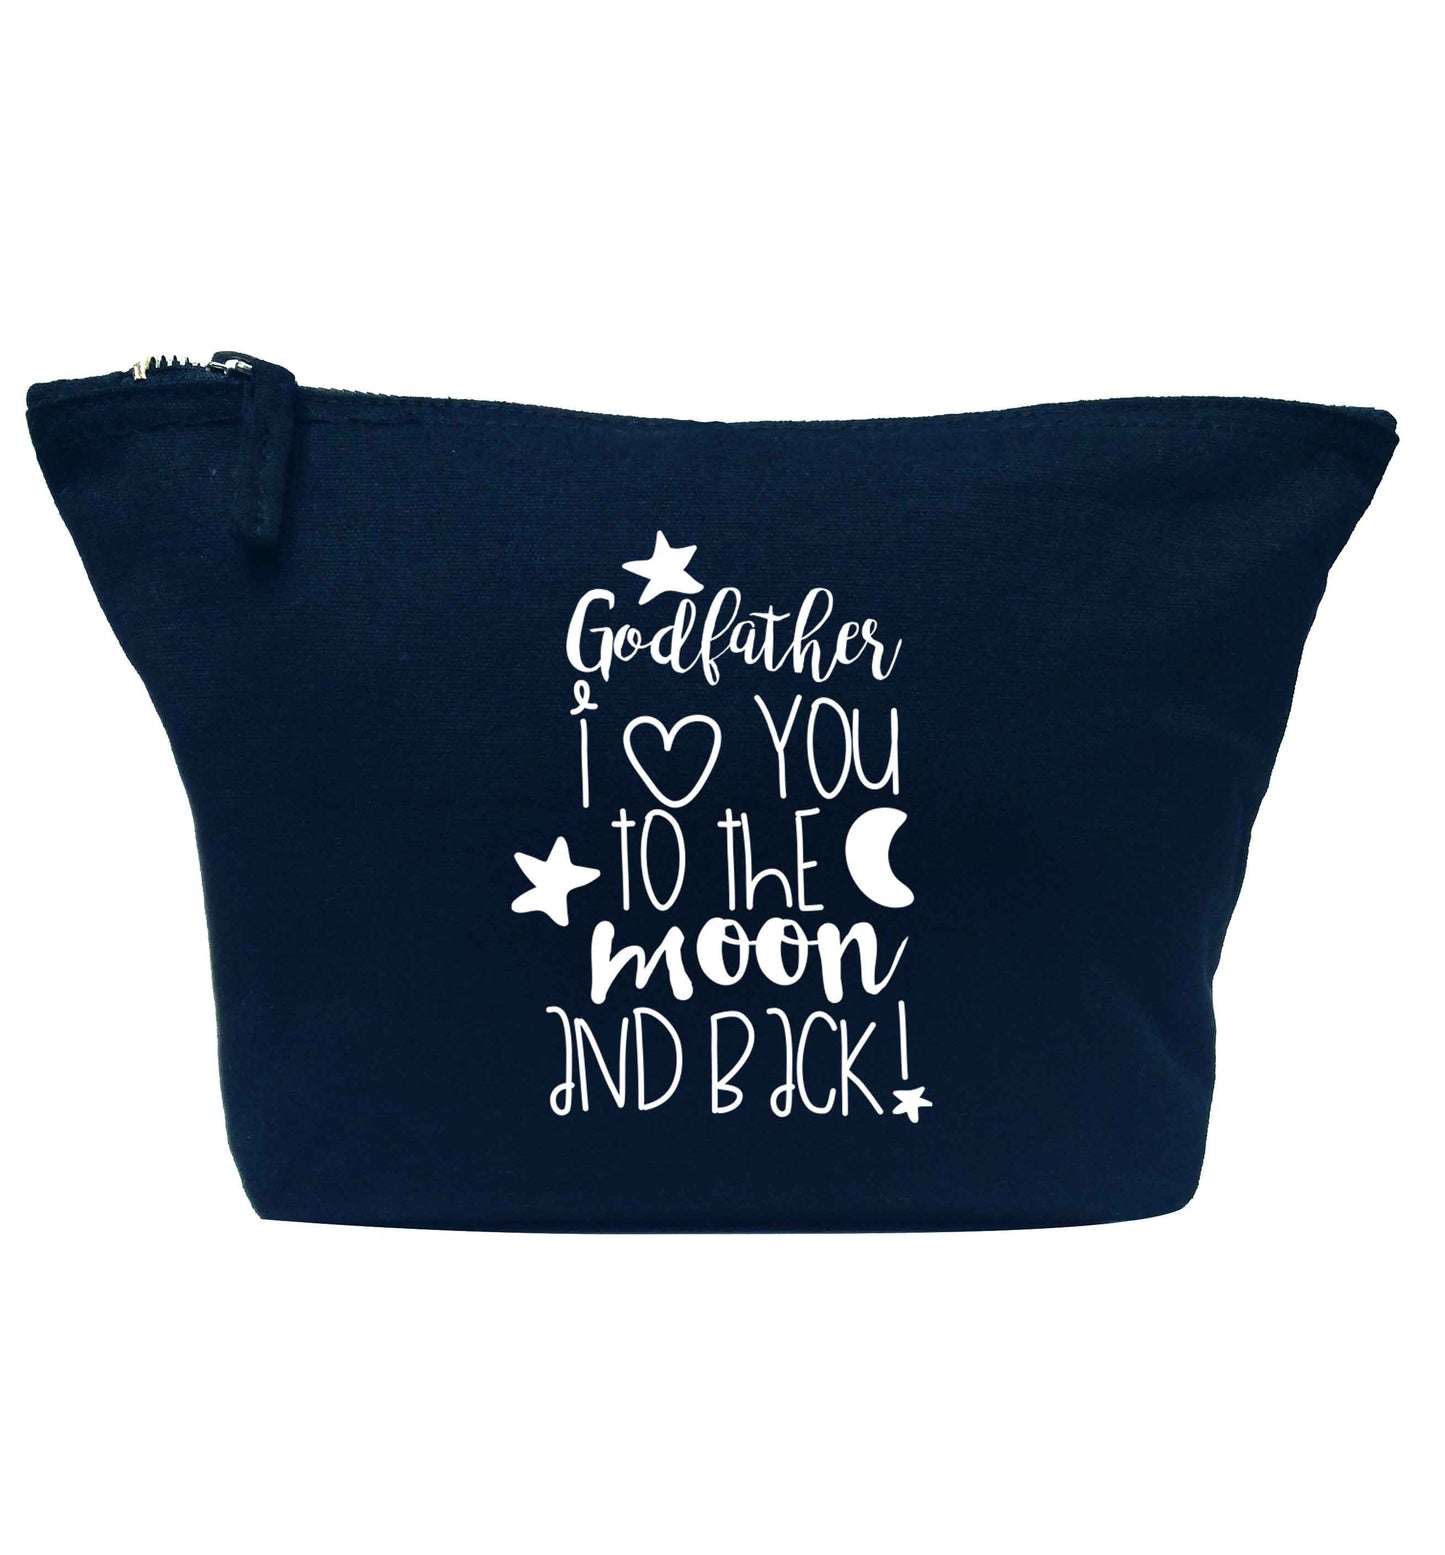 Godfather I love you to the moon and back navy makeup bag